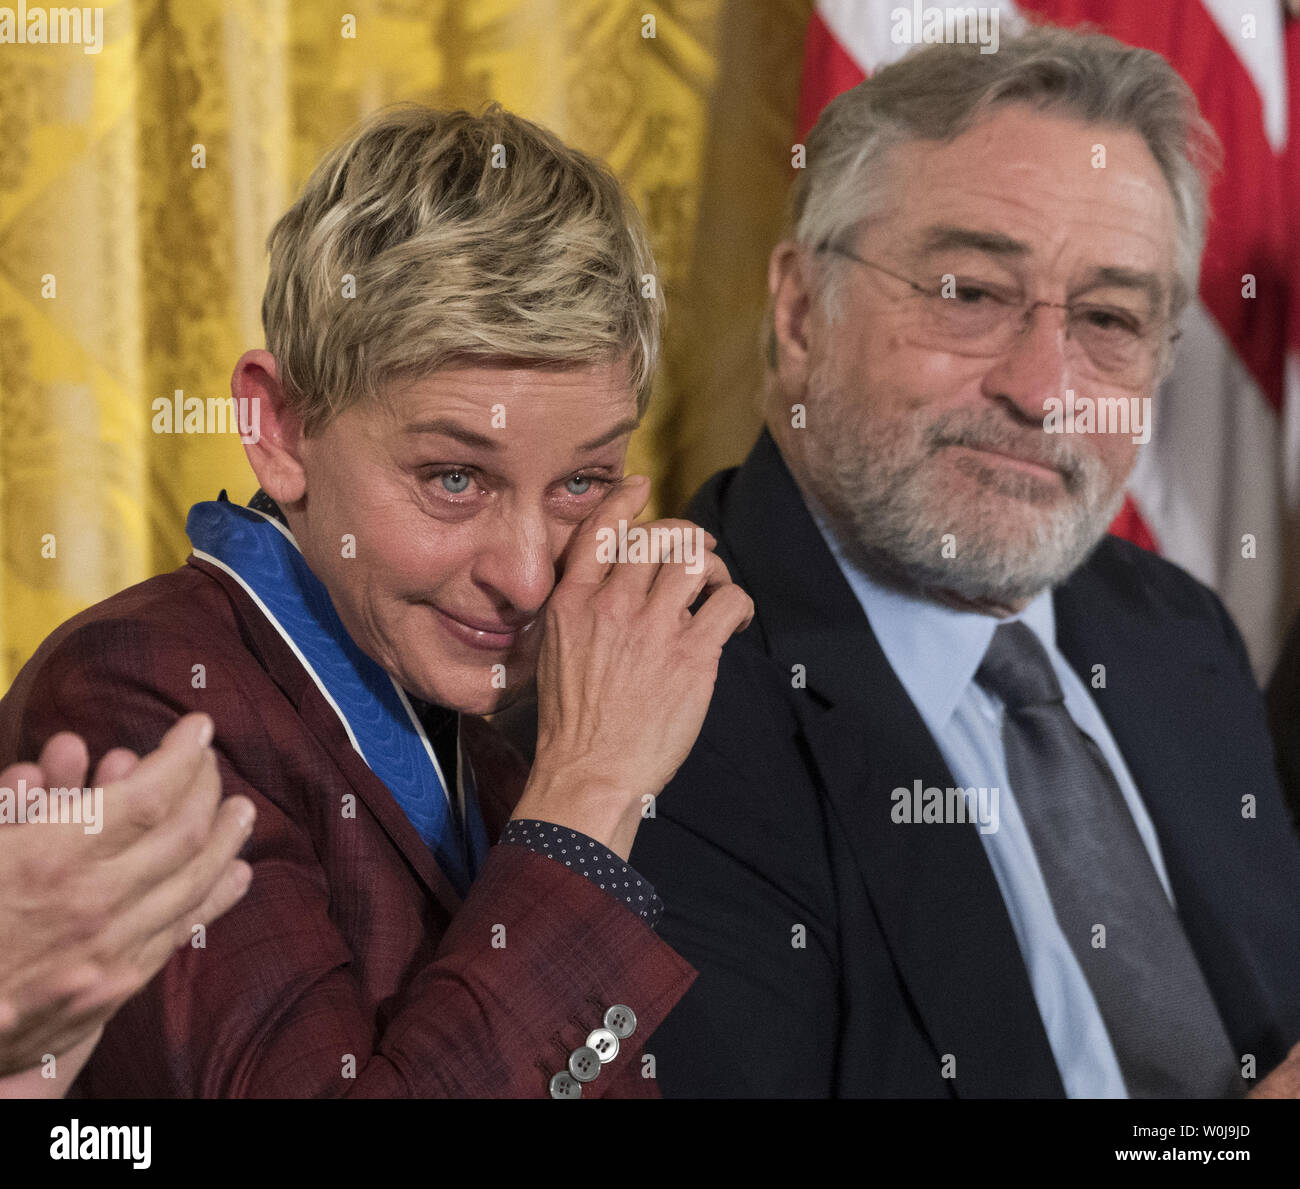 Comedian Ellen DeGeneres sheds a tear after President Barack Obama awarded  her Presidential Medal of Freedom during a ceremony in the East Room at the  White House in Washington, D.C. on November